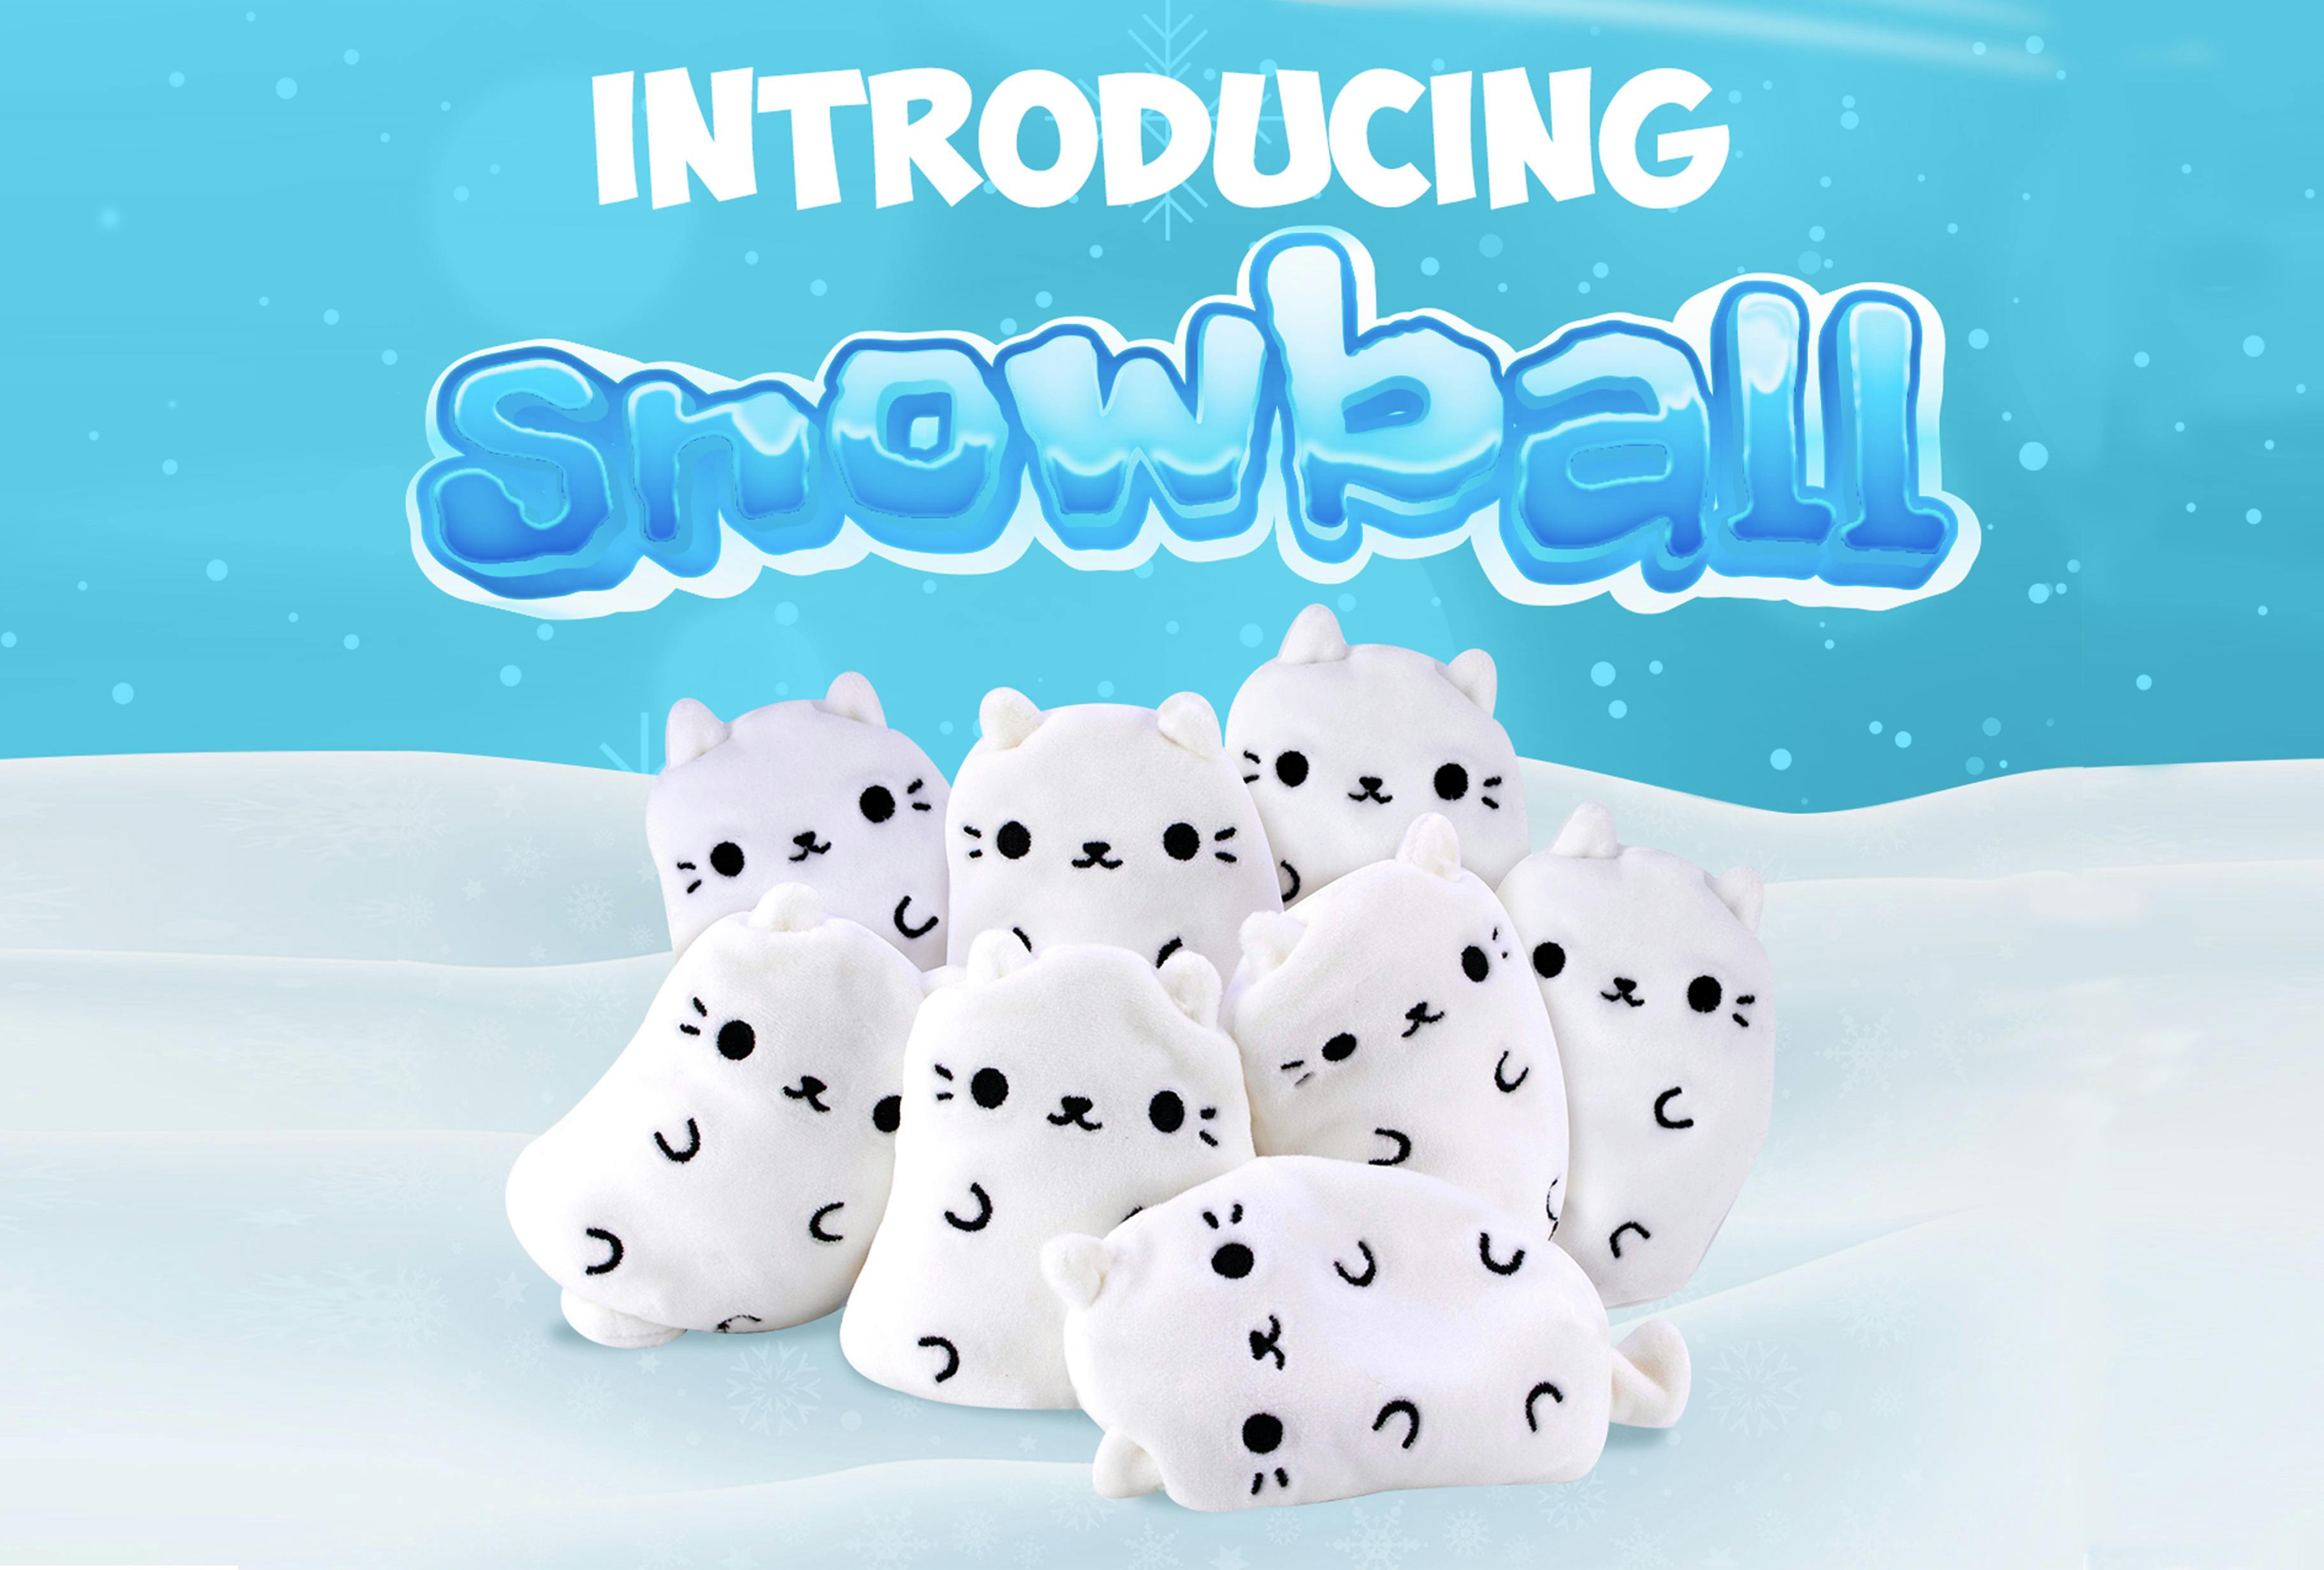 Introducing snowball by Cats Vs Pickles